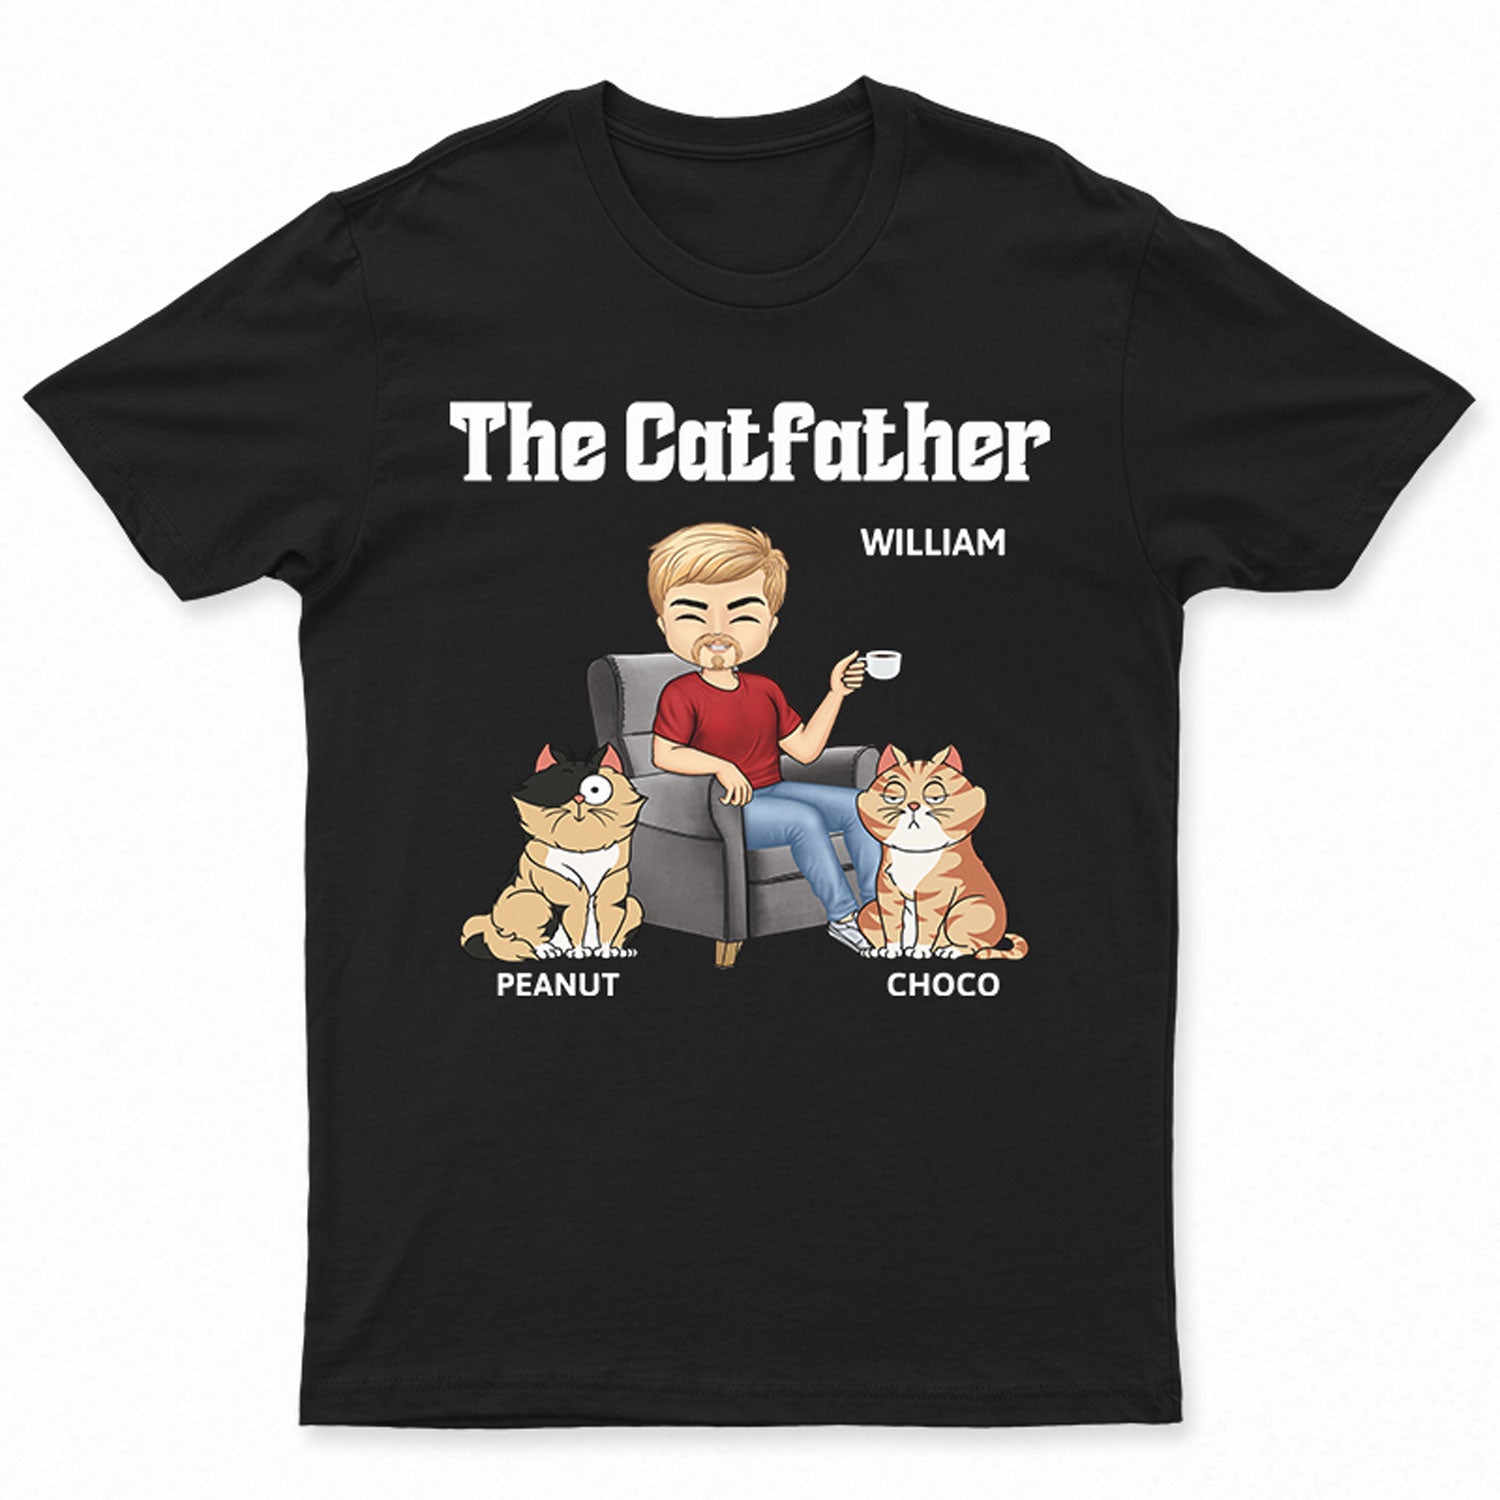 The Cat Father - Gift For Cat Dad, Cat Lovers, Men - Personalized T Shirt